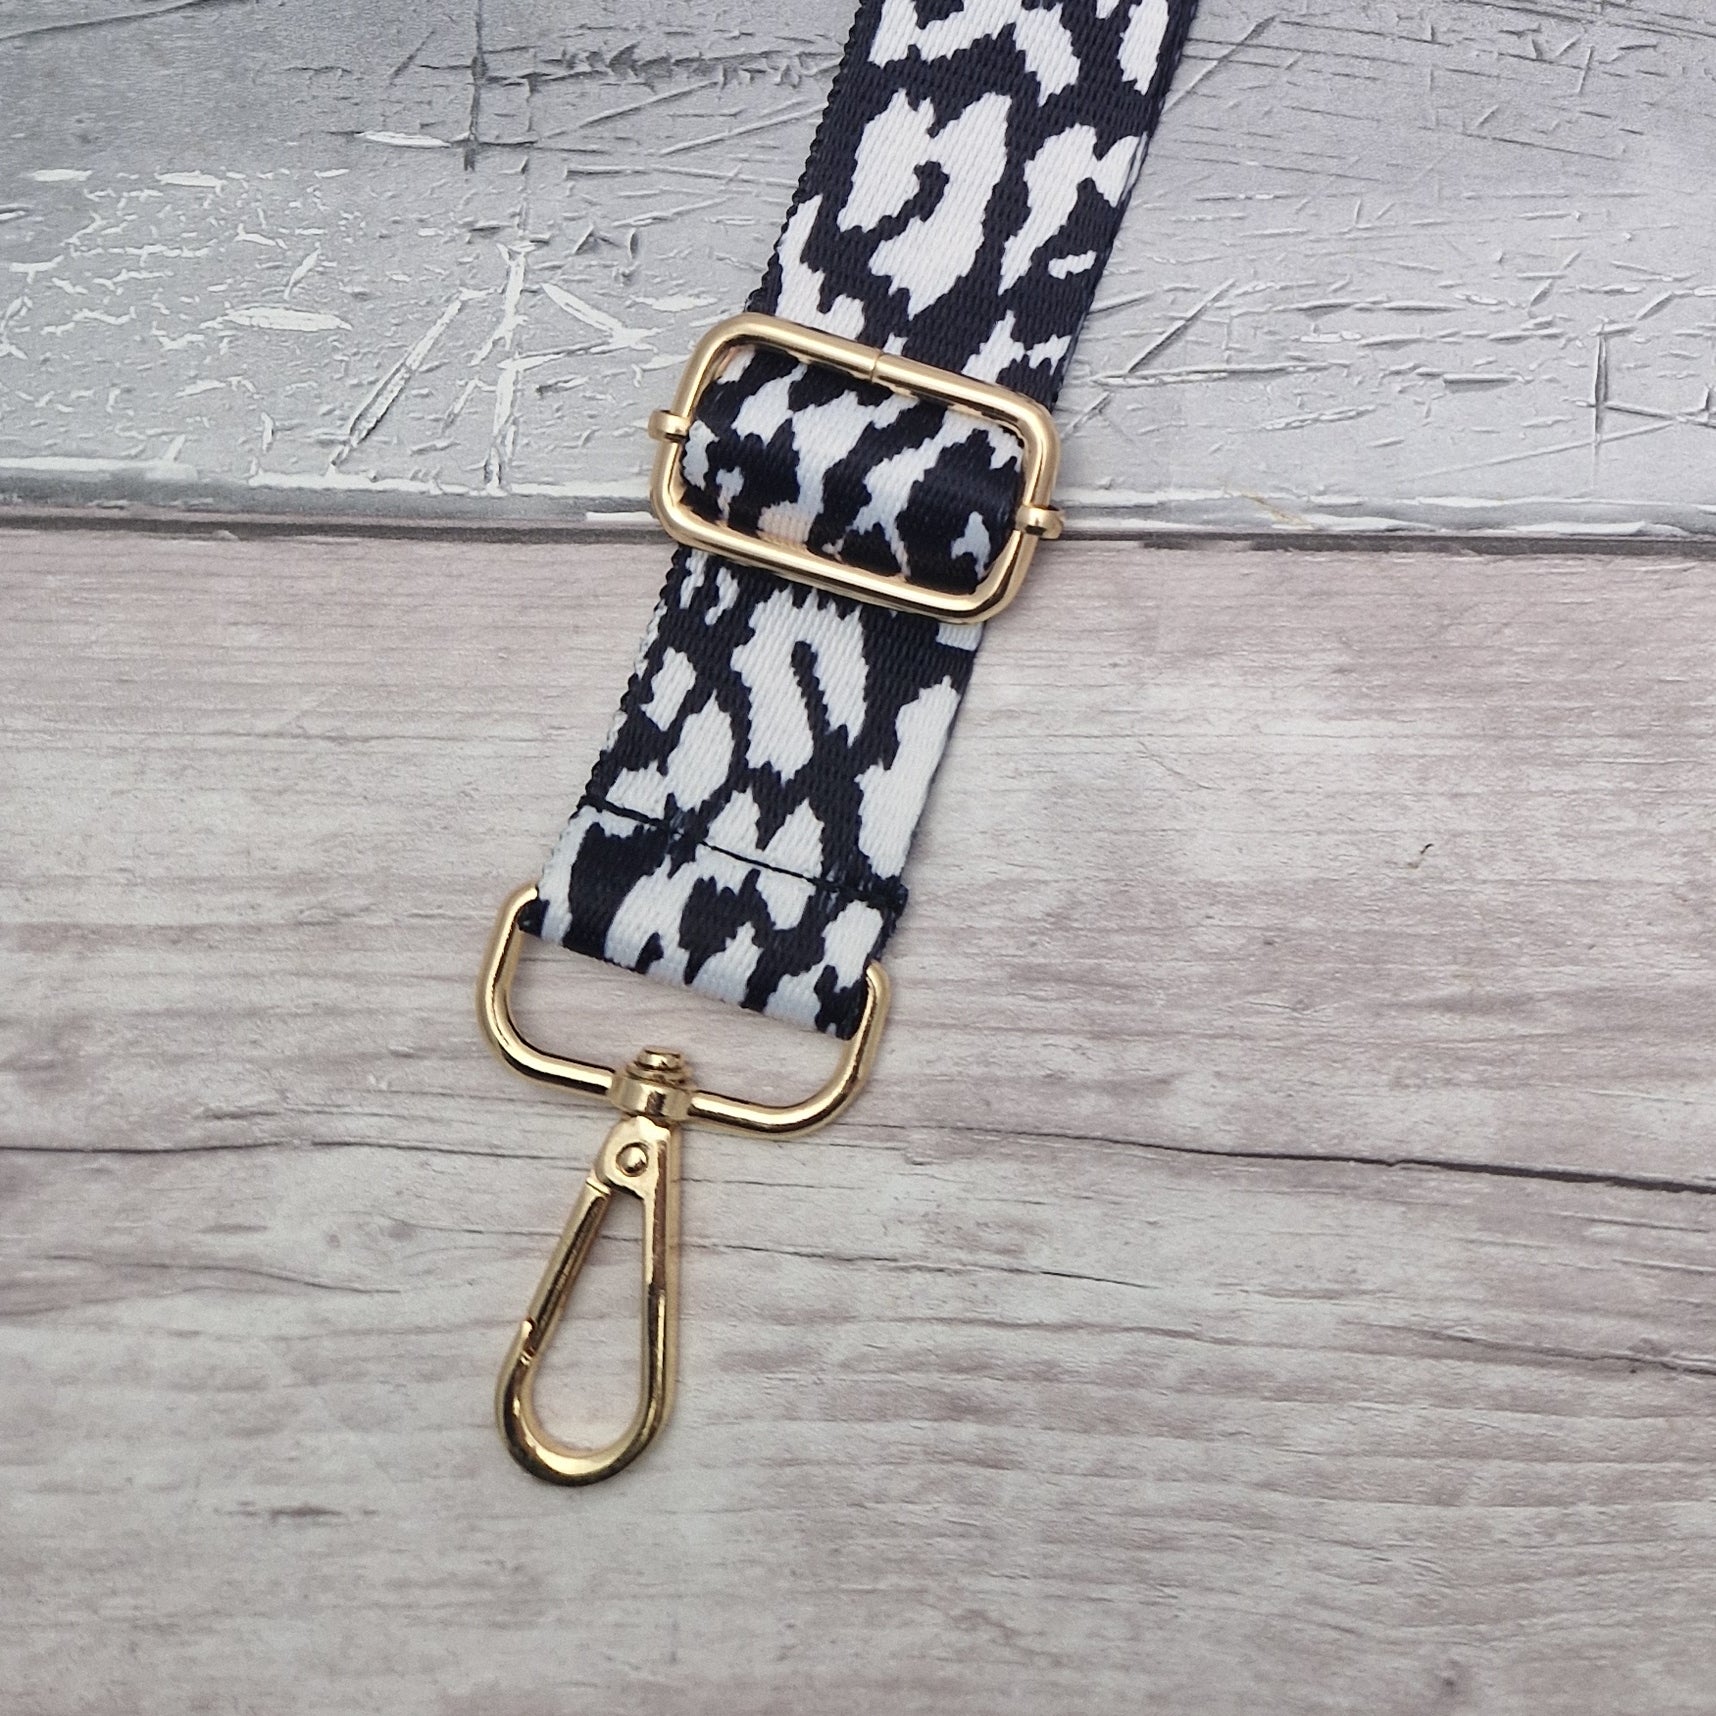 Black and White print bag strap with gold metal work.